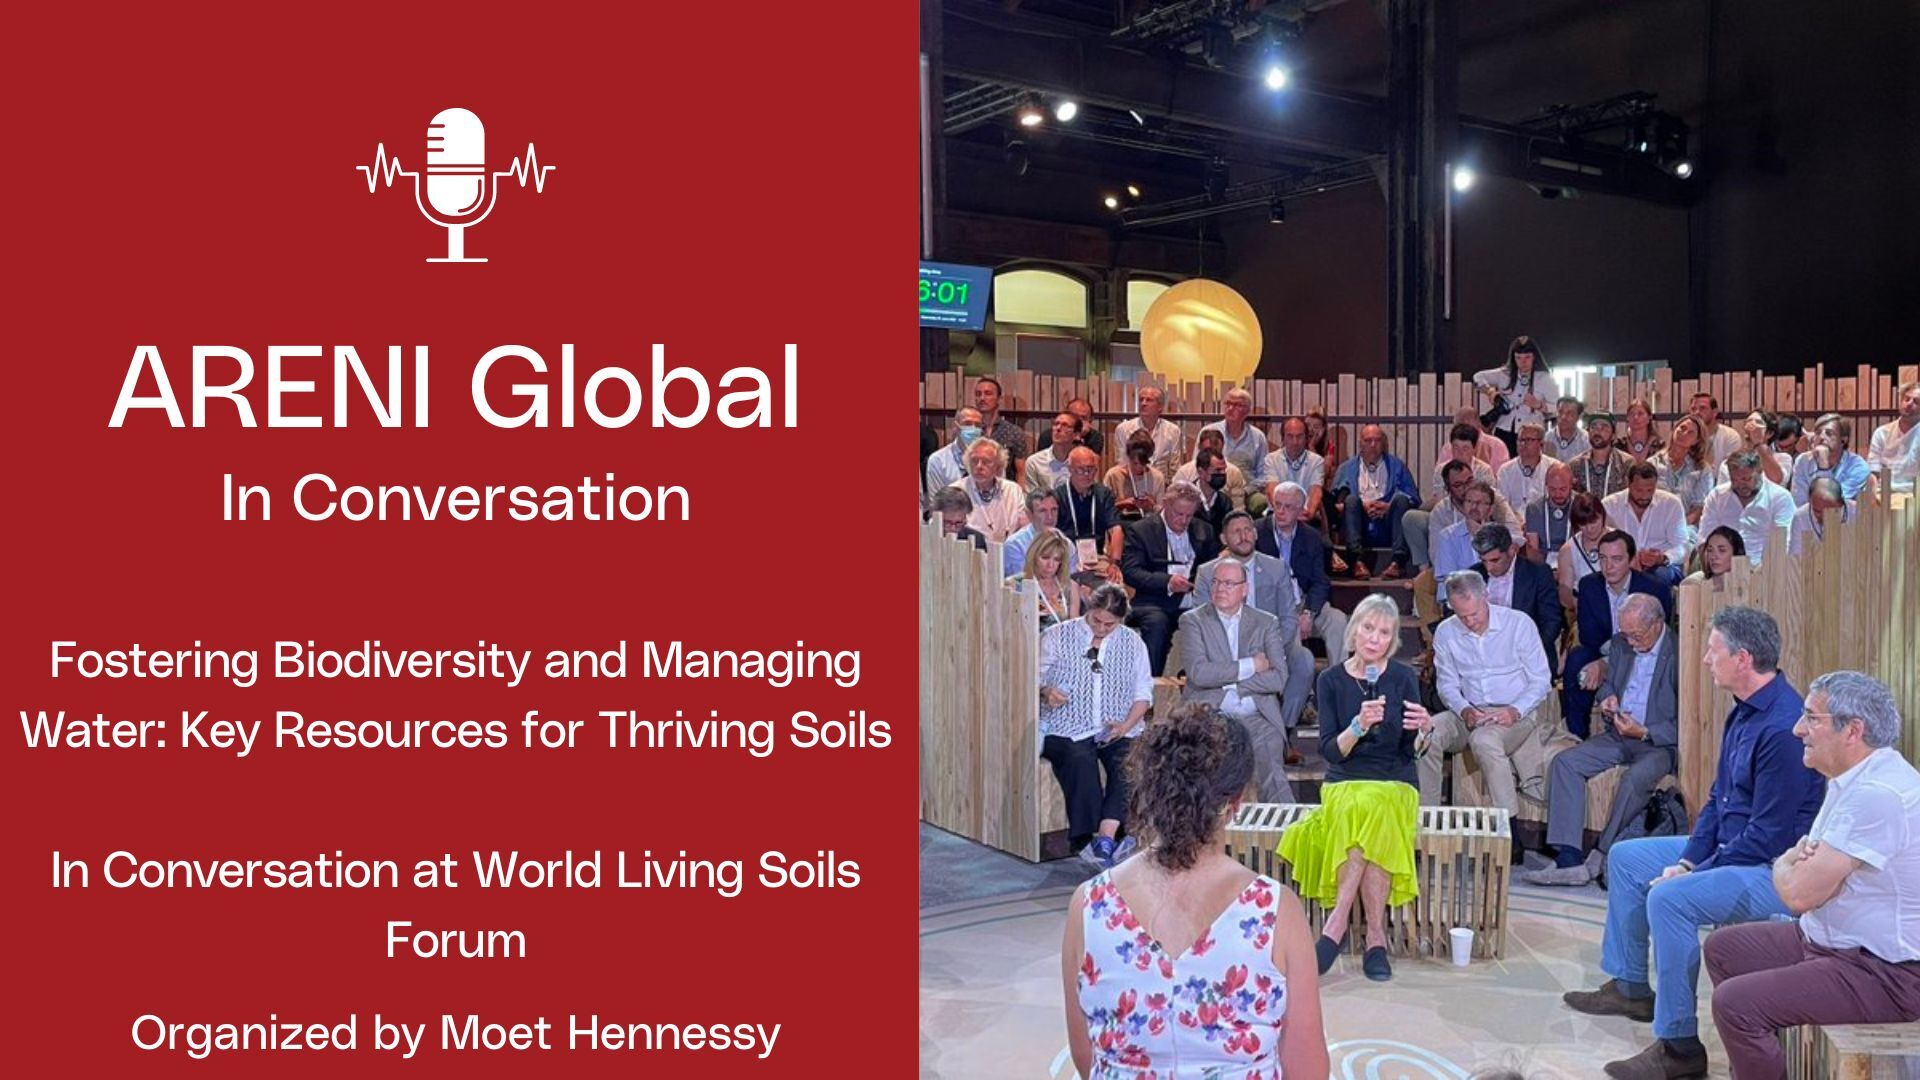 Fostering Biodiversity and Managing Water: In Conversation at the World Living Soil Forum